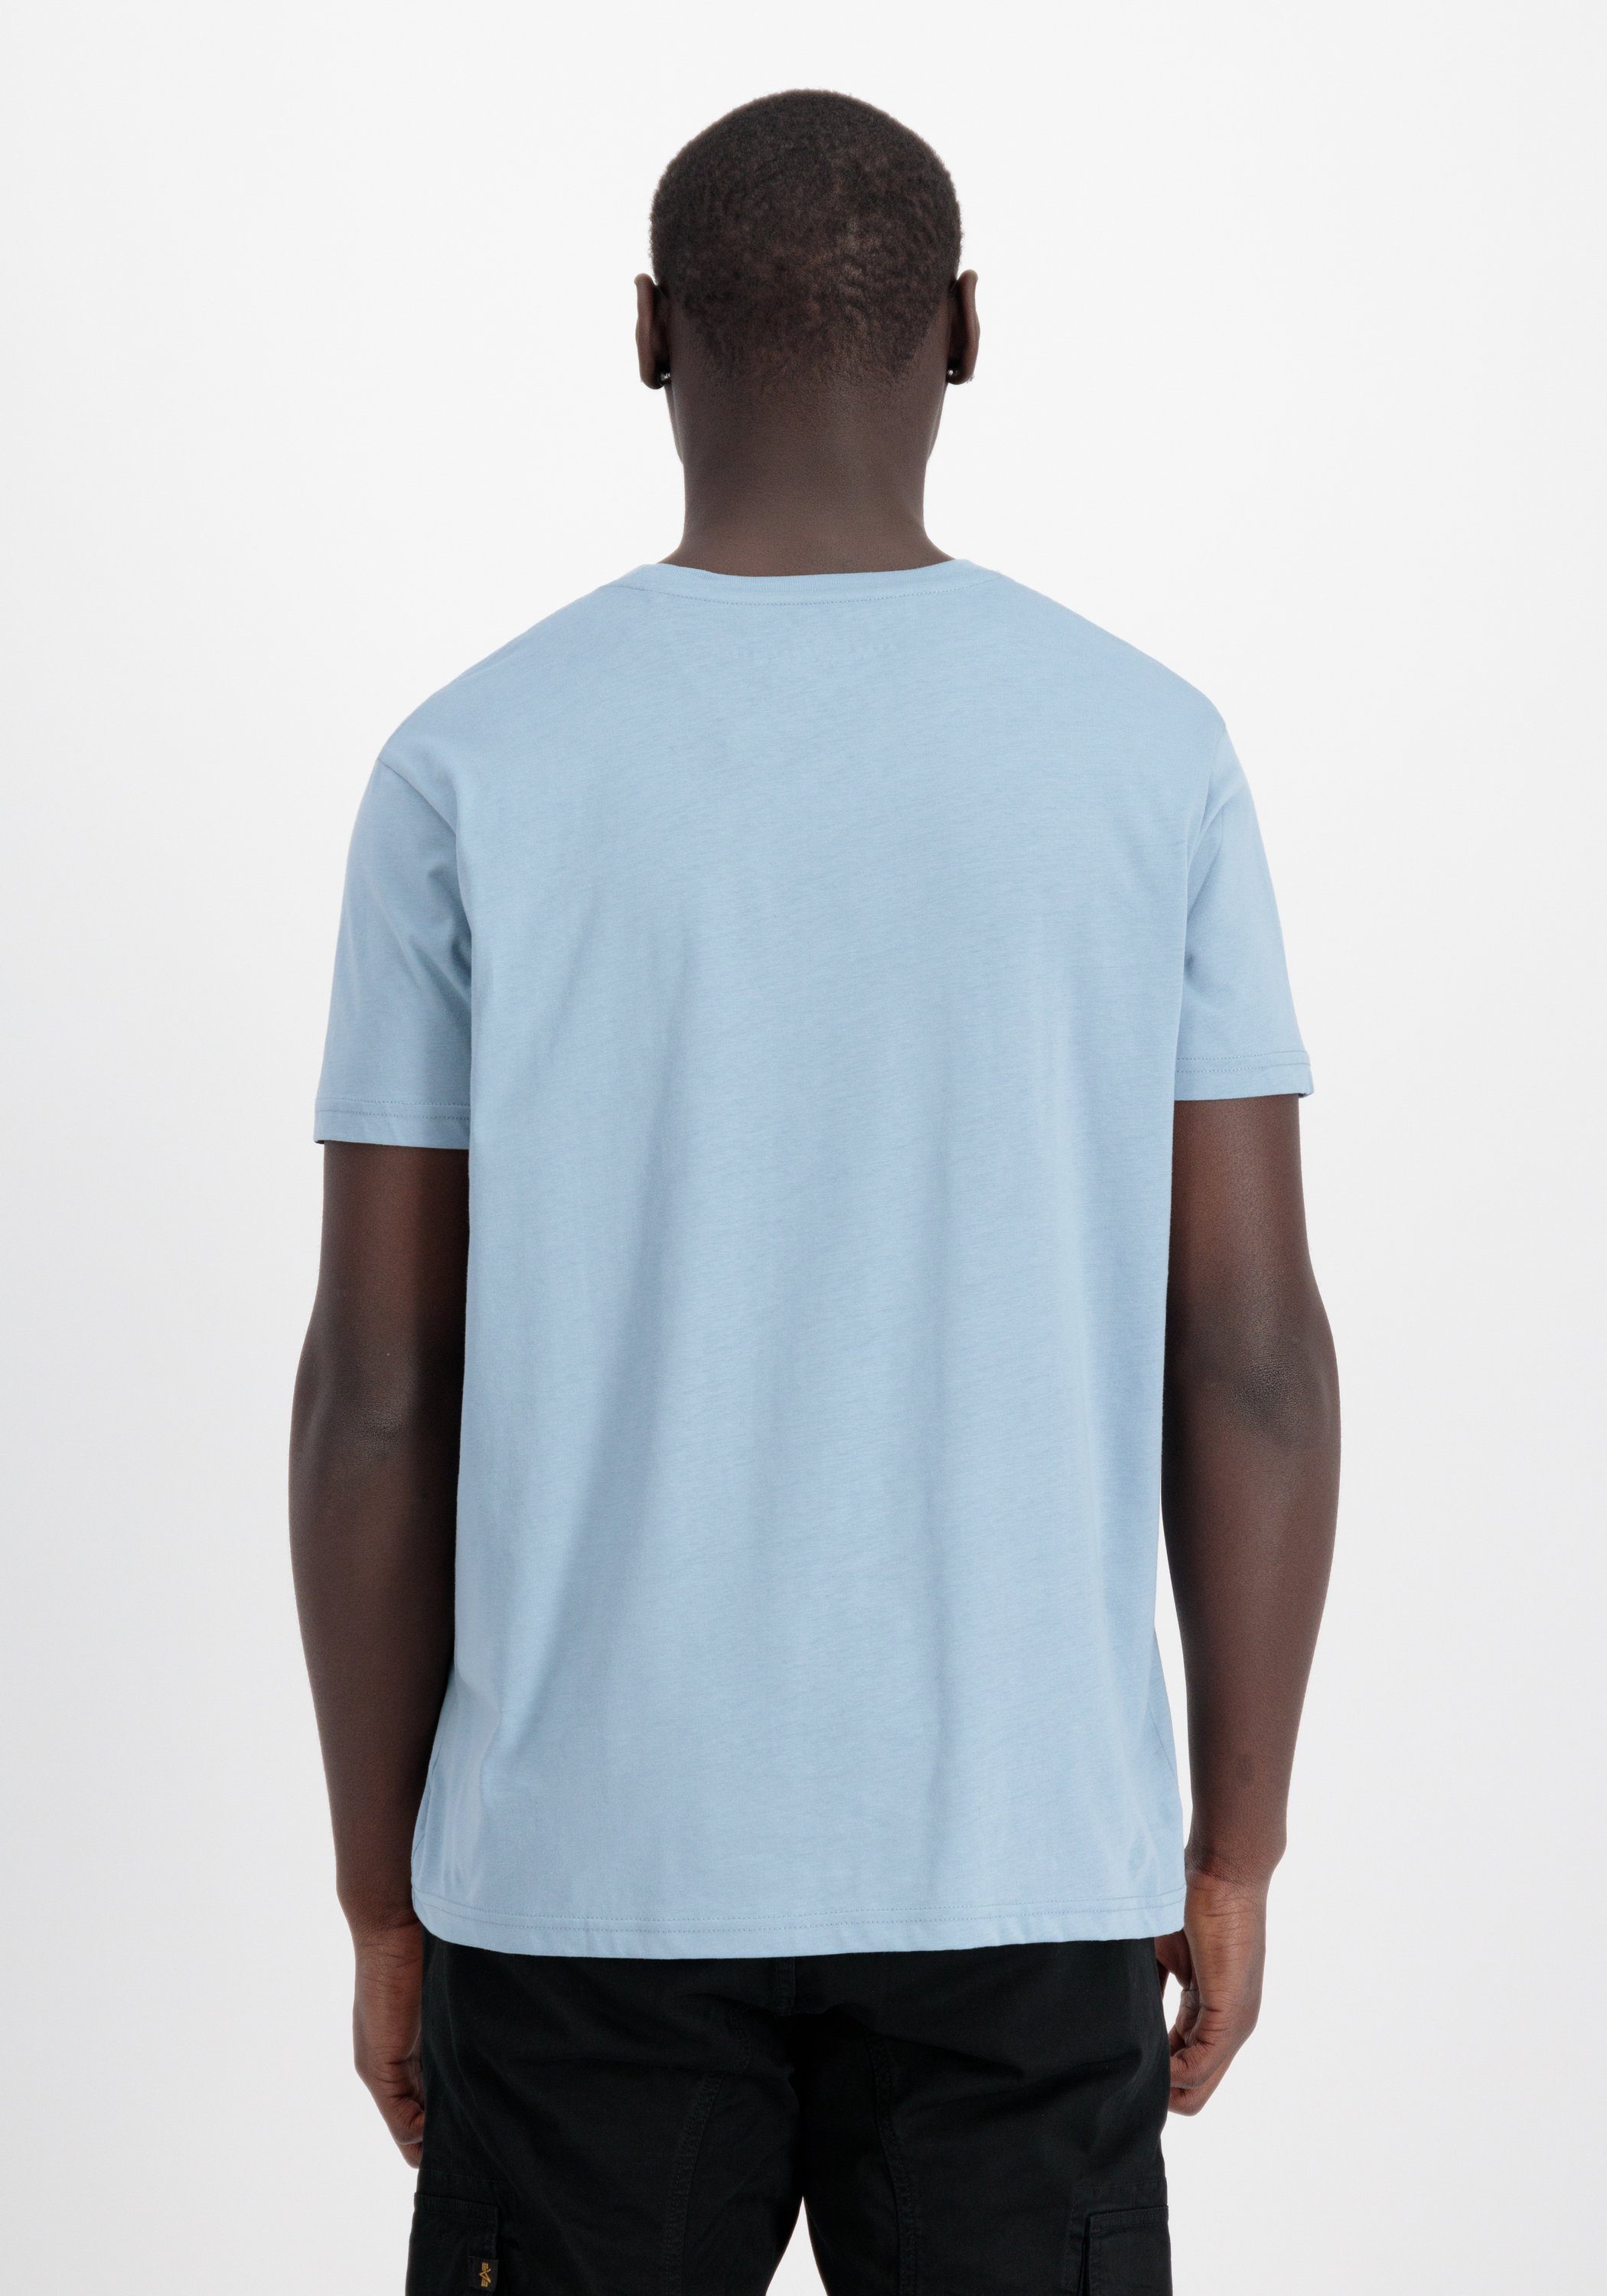 Alpha Industries T Industries Basic T-Shirts greyblue Embroidery T-Shirt Alpha Men 